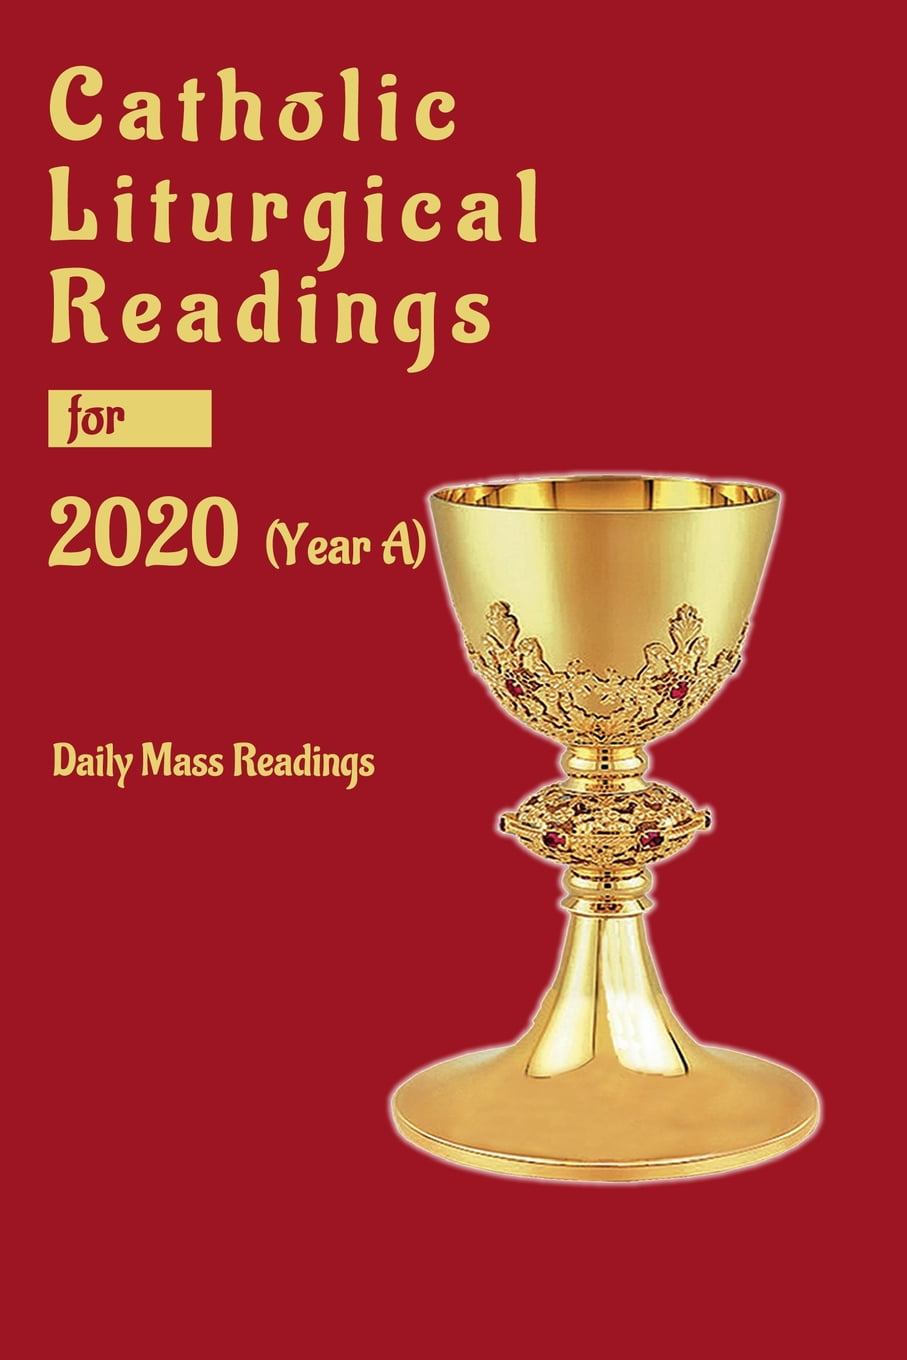 Catholic Liturgical Readings for 2020 (Year A) Daily Mass Reading